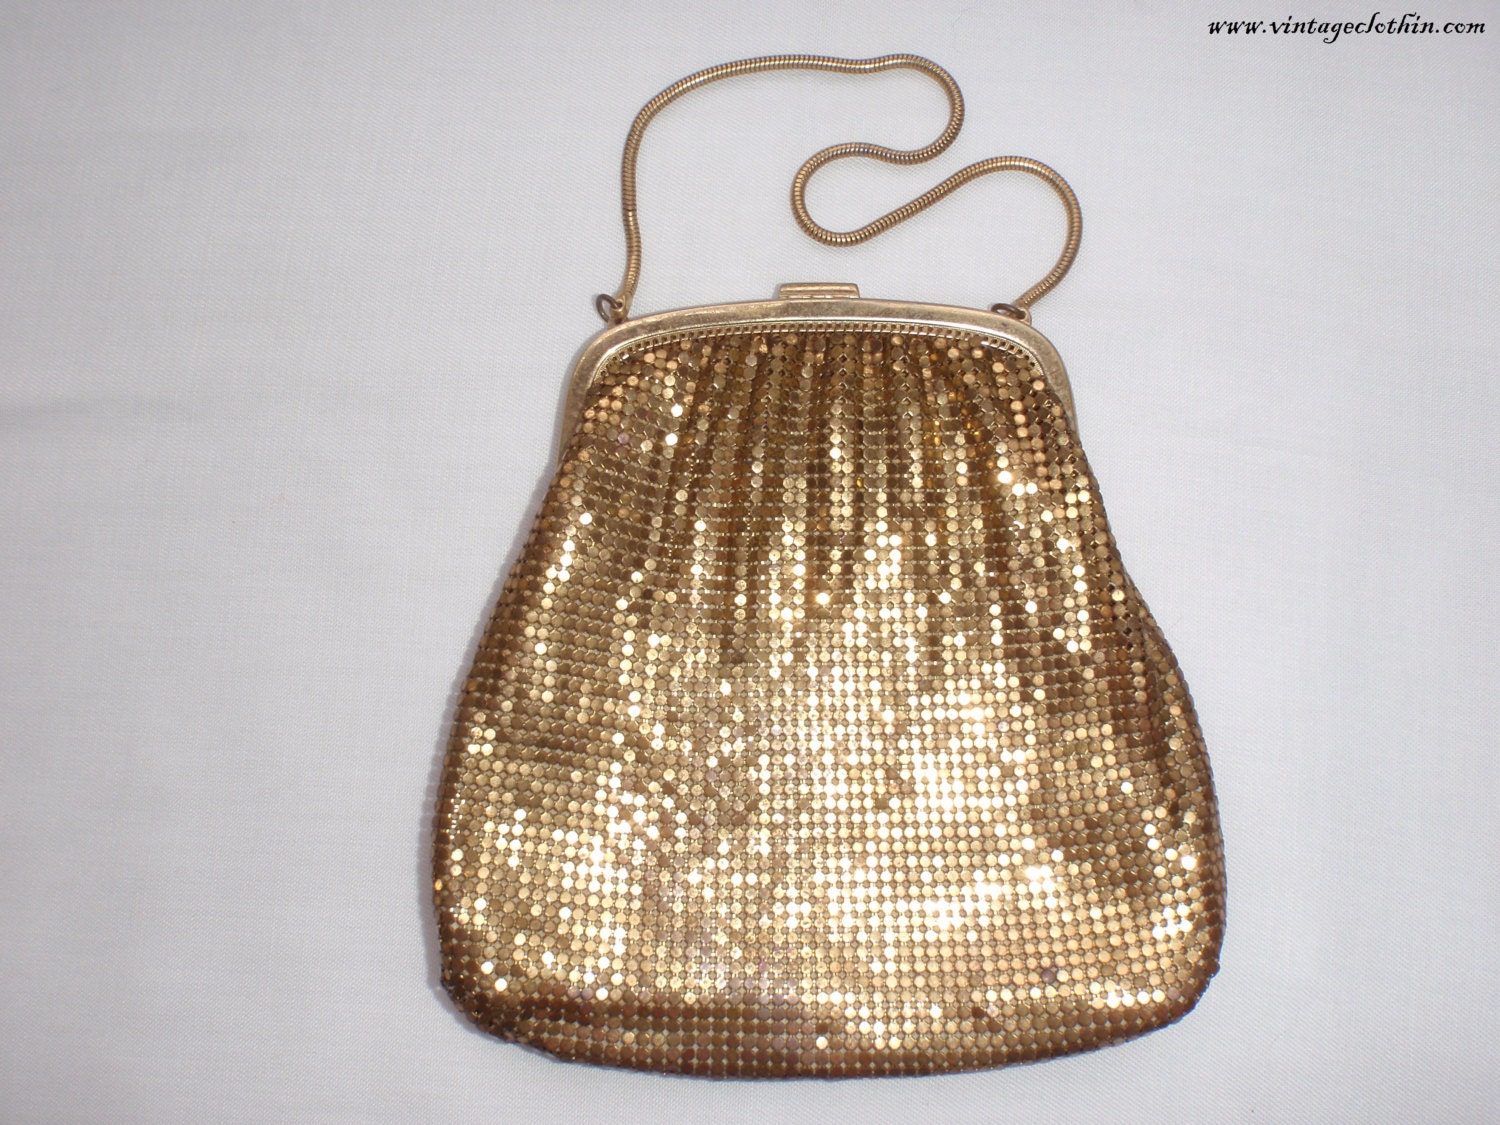 1930s Whiting & Davis Vintage Gold Mesh Purse, Whiting and Davis Purse ...